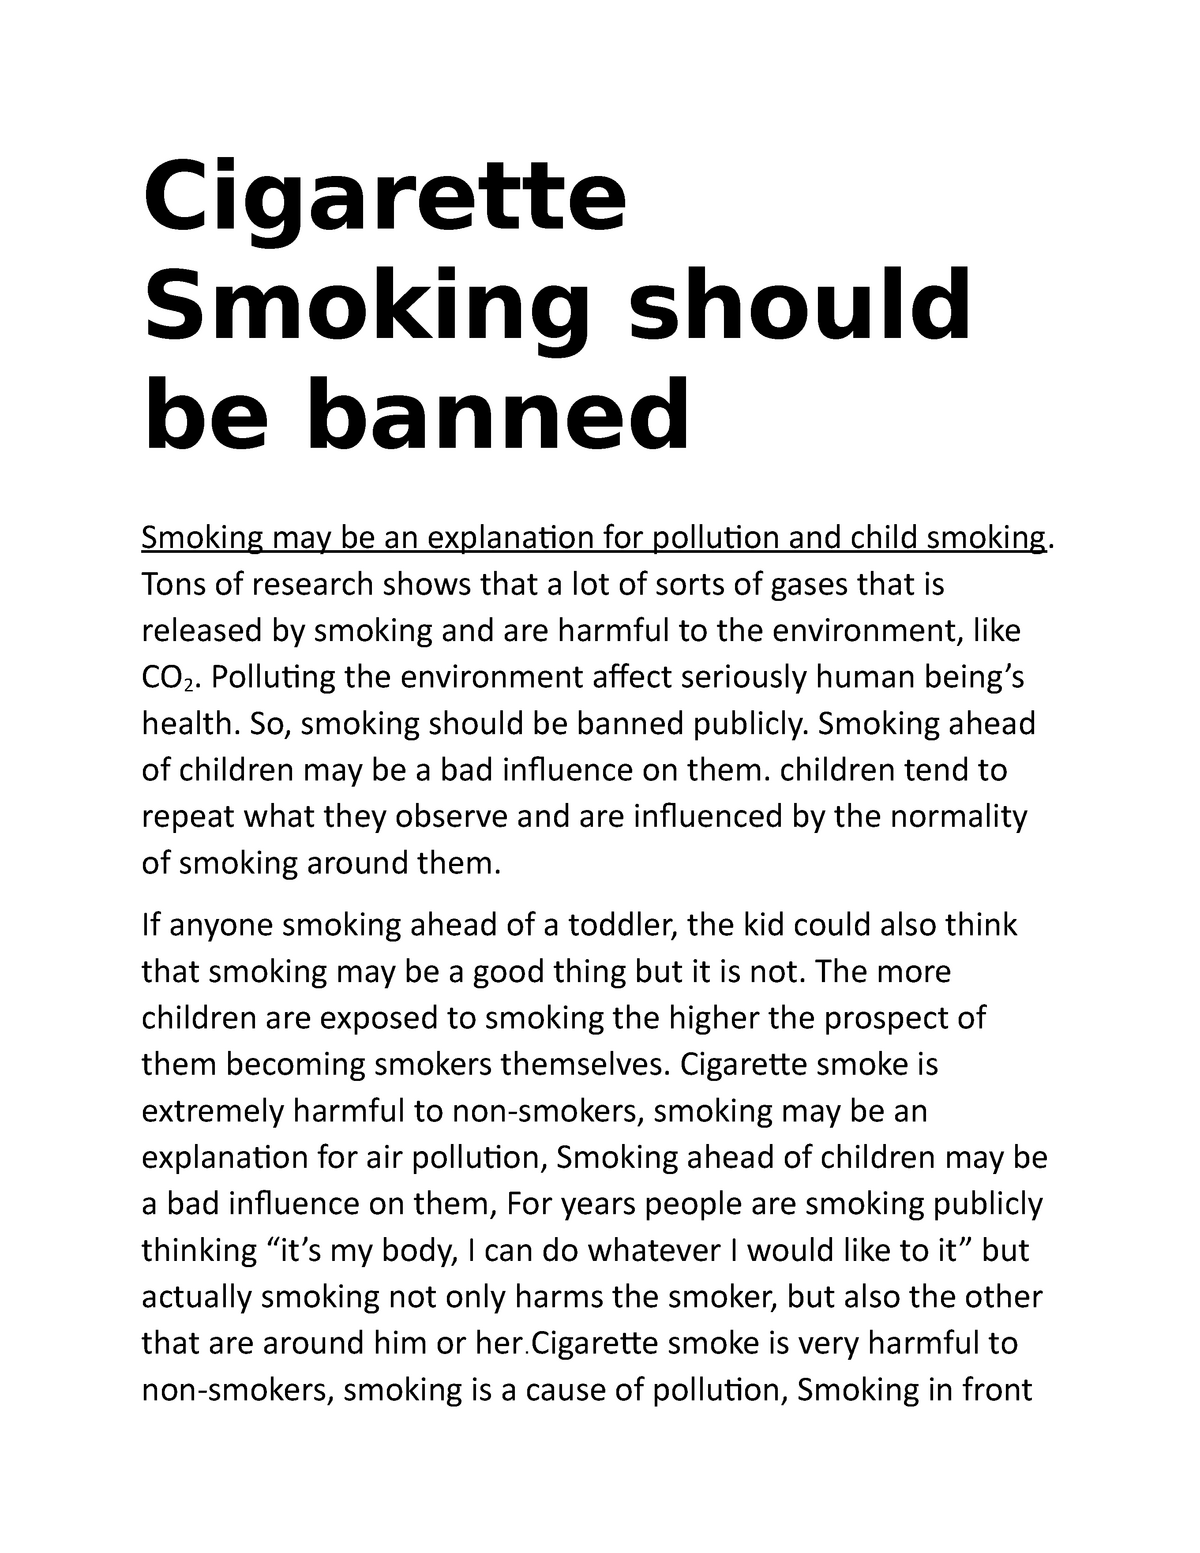 dangers of smoking cigarettes essay